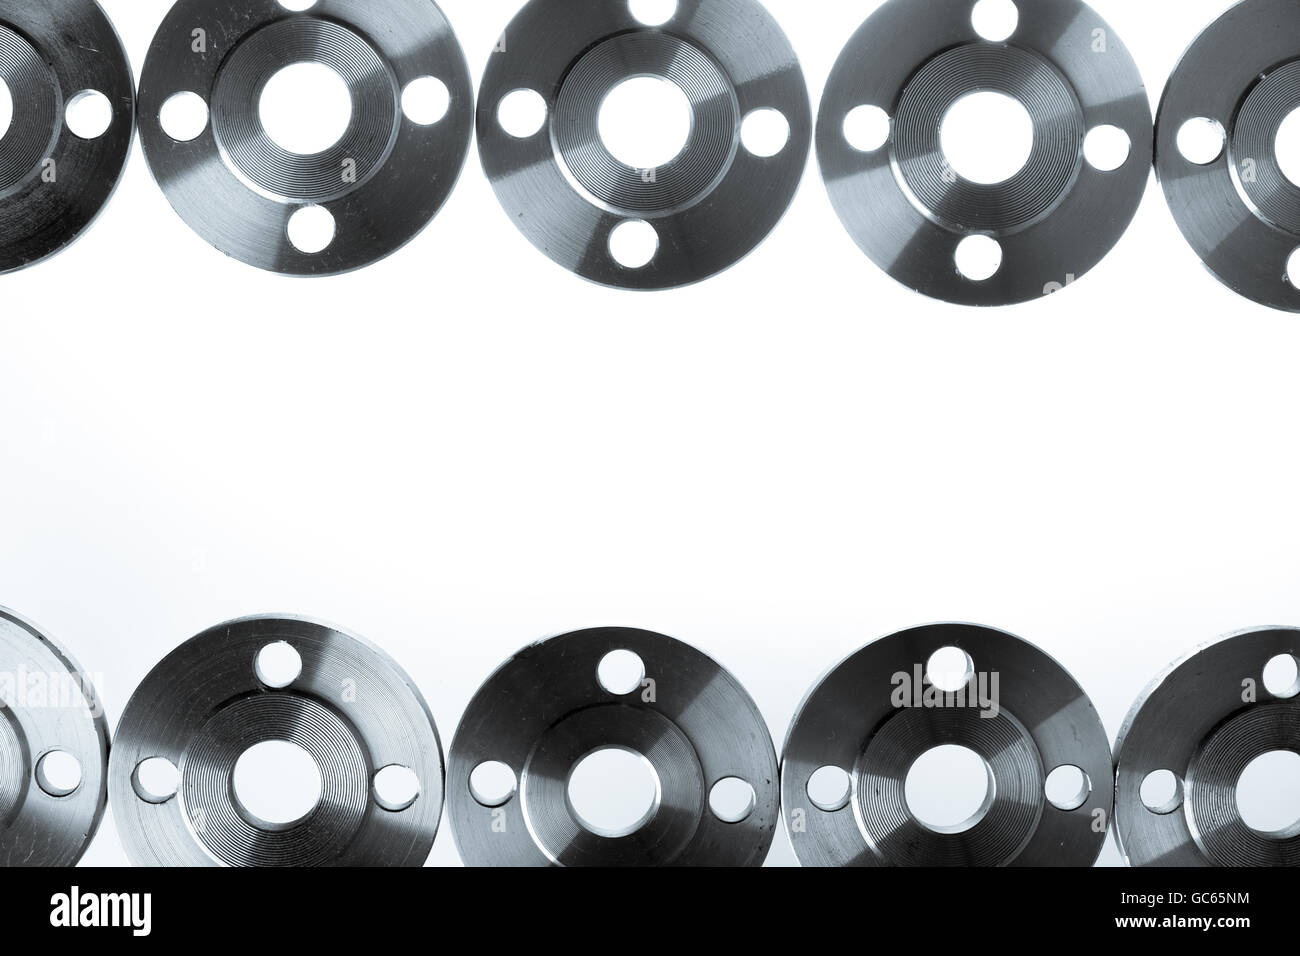 Border of flat steel welding flanges on white background. Stock Photo